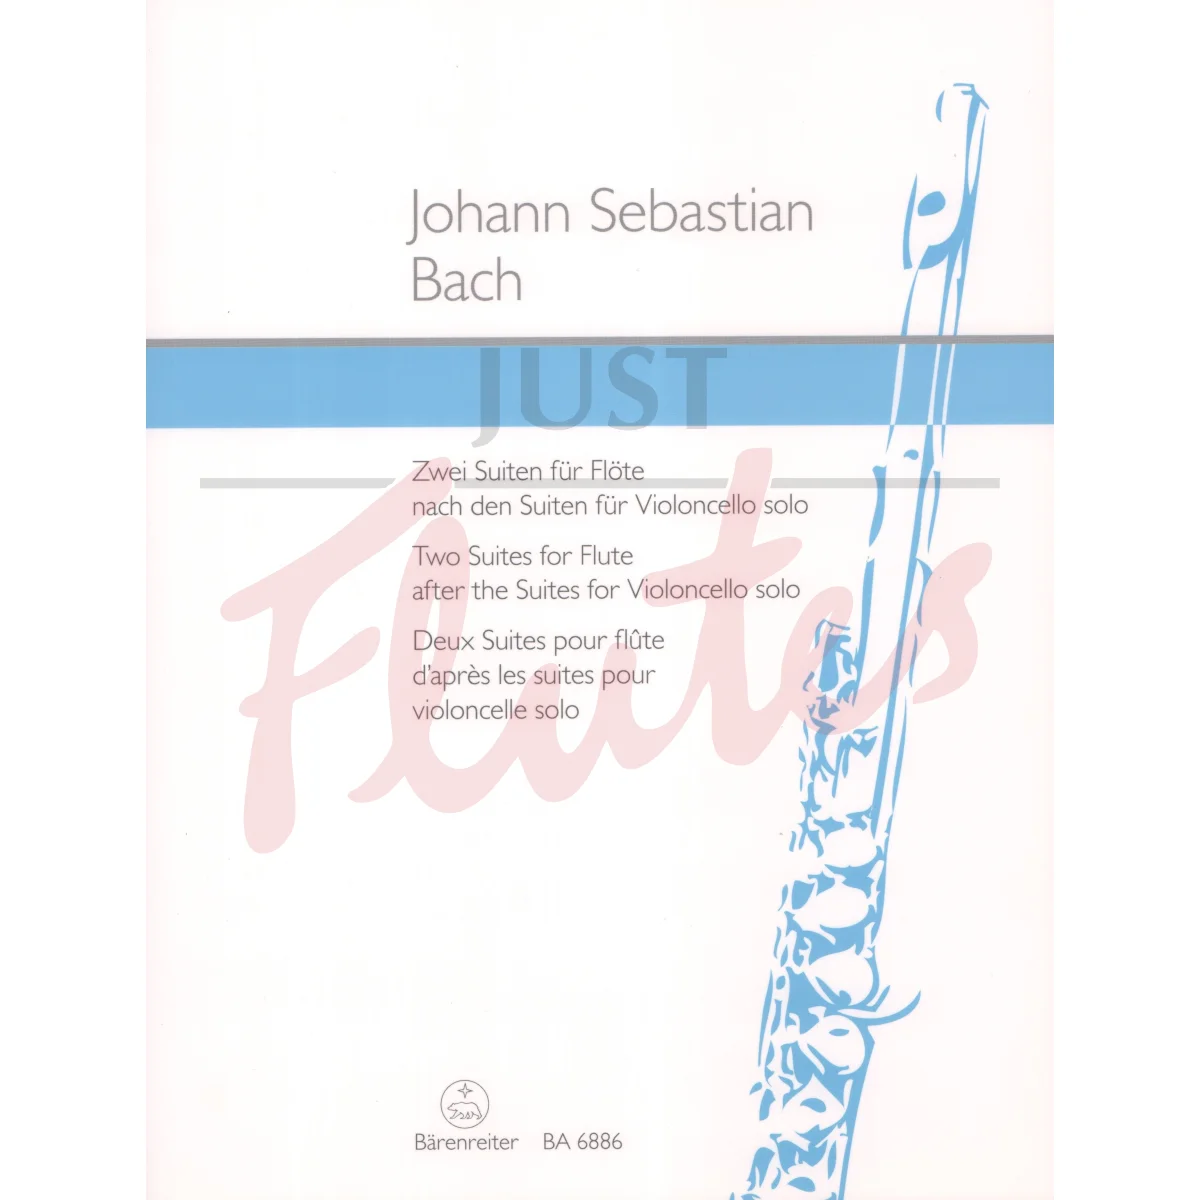 Two Suites for Flute after Cello Suites